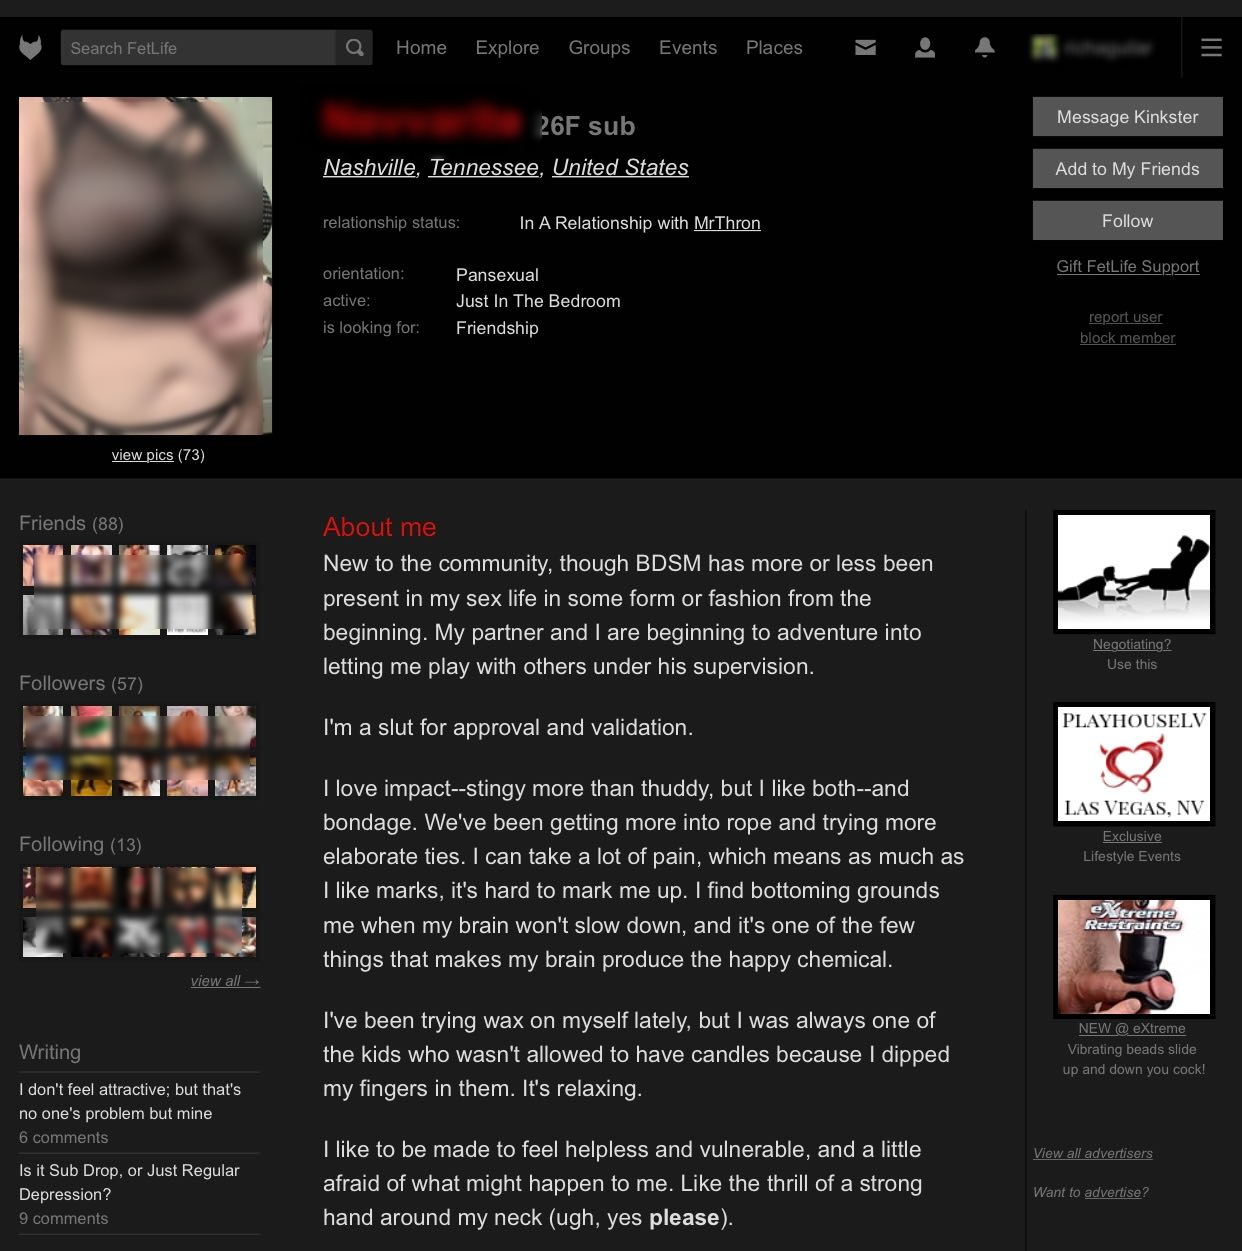 Kit Q&A: How do you meet people on FetLife?